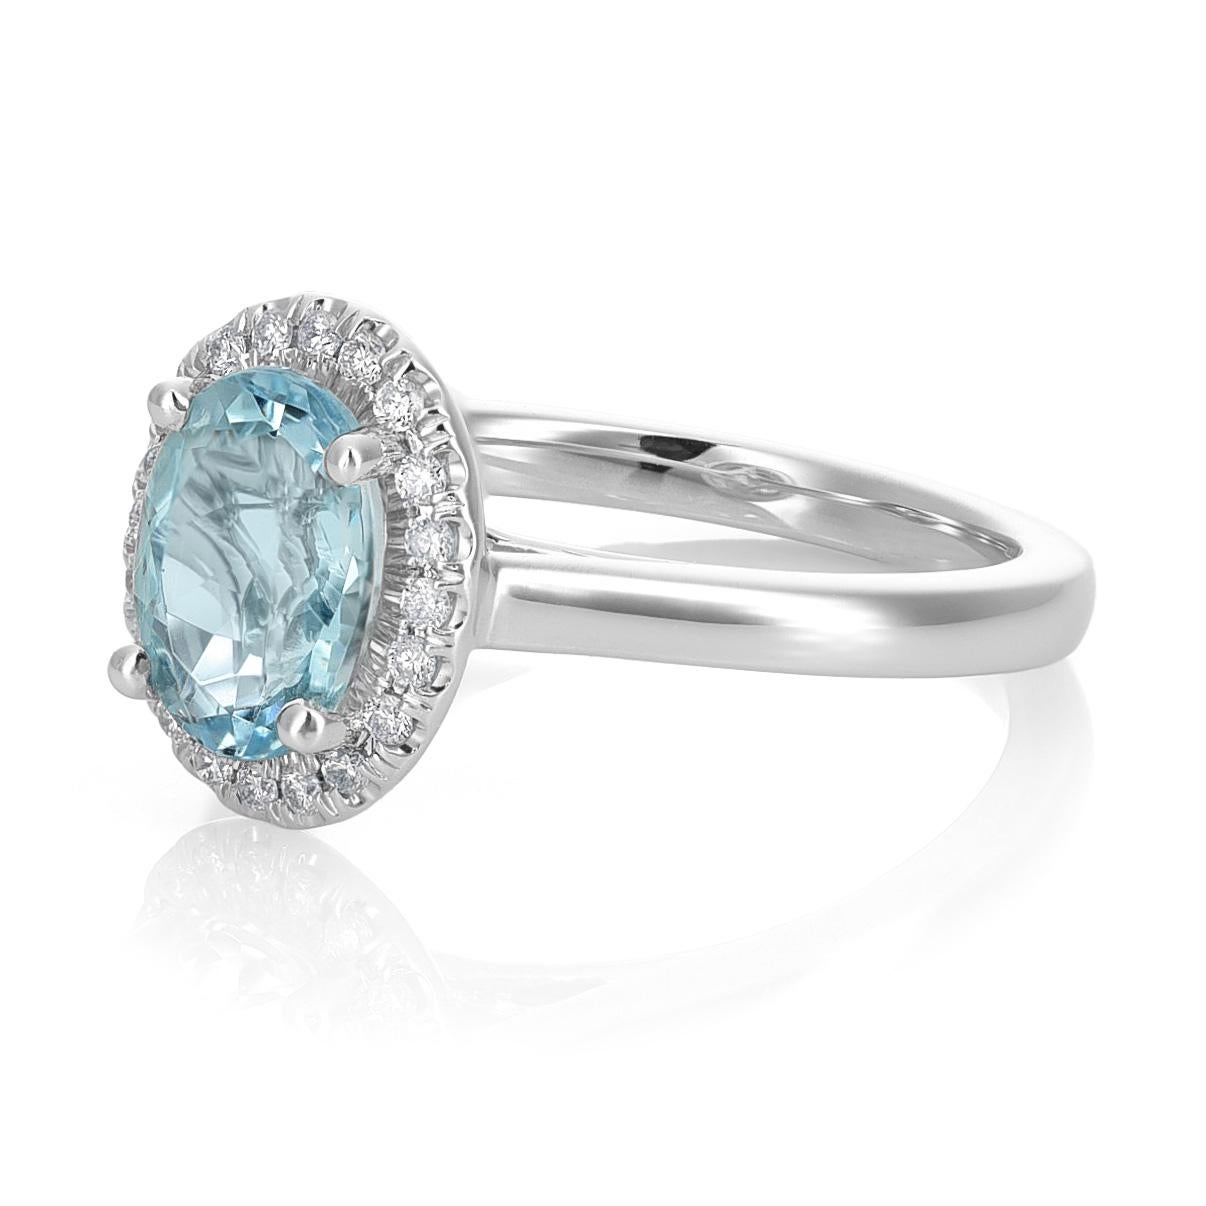 Introducing a 14K White Gold ring adorned with a stunning 1.62 carats oval-shaped Natural Aquamarine. This mesmerizing gem, delicately heated for enhanced brilliance, takes center stage amidst 0.15 carats of Diamonds, creating an exquisite symphony